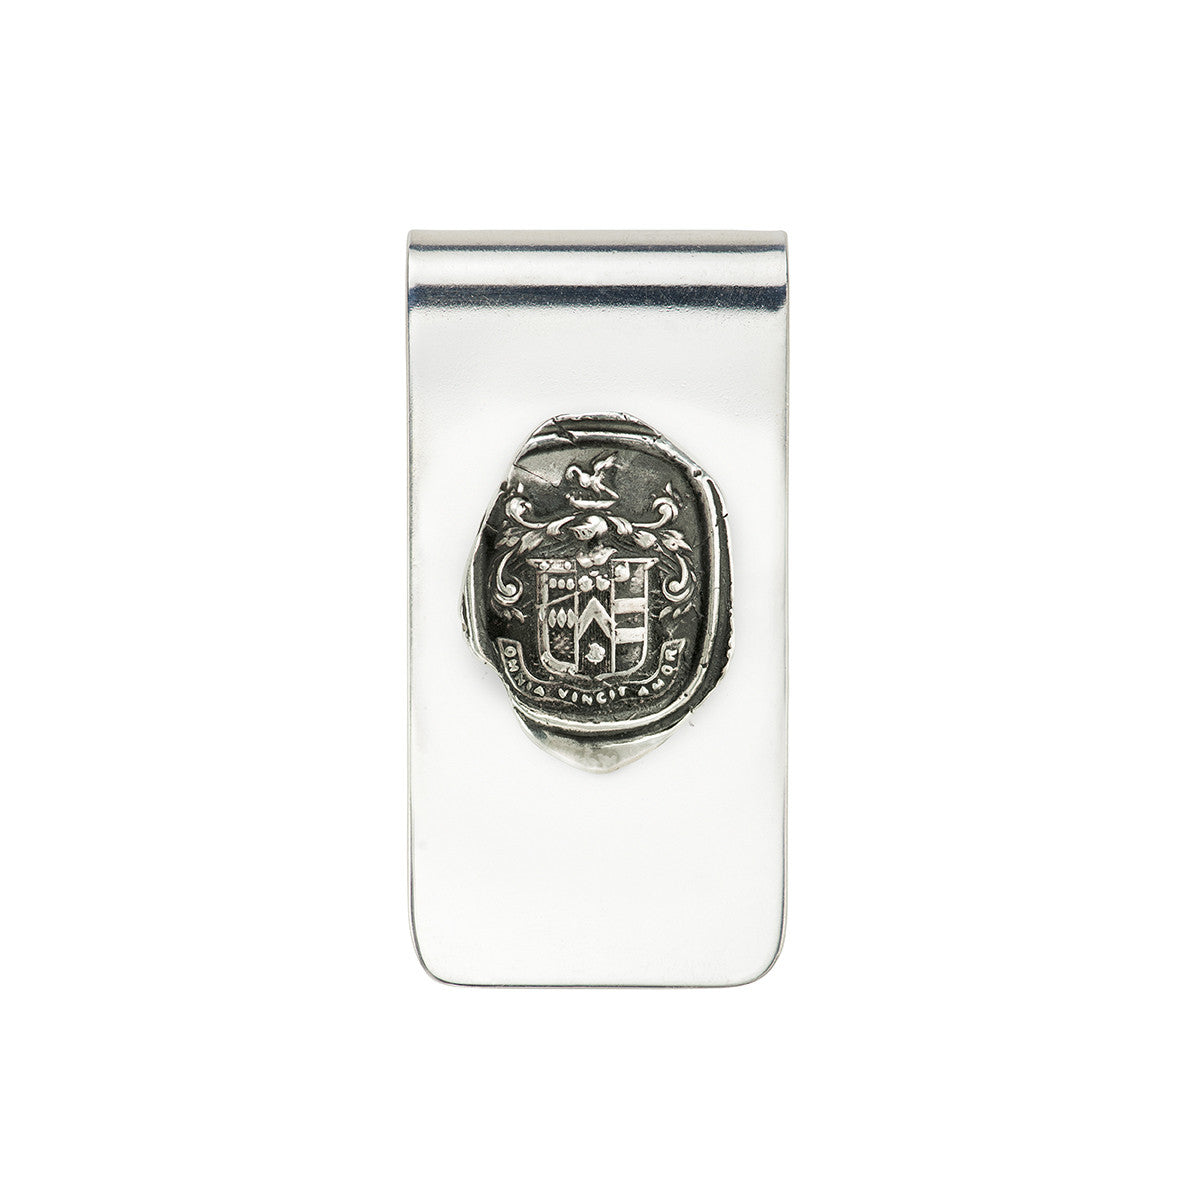 A sterling silver money clip featuring our sterling silver Love Conquers All talisman.